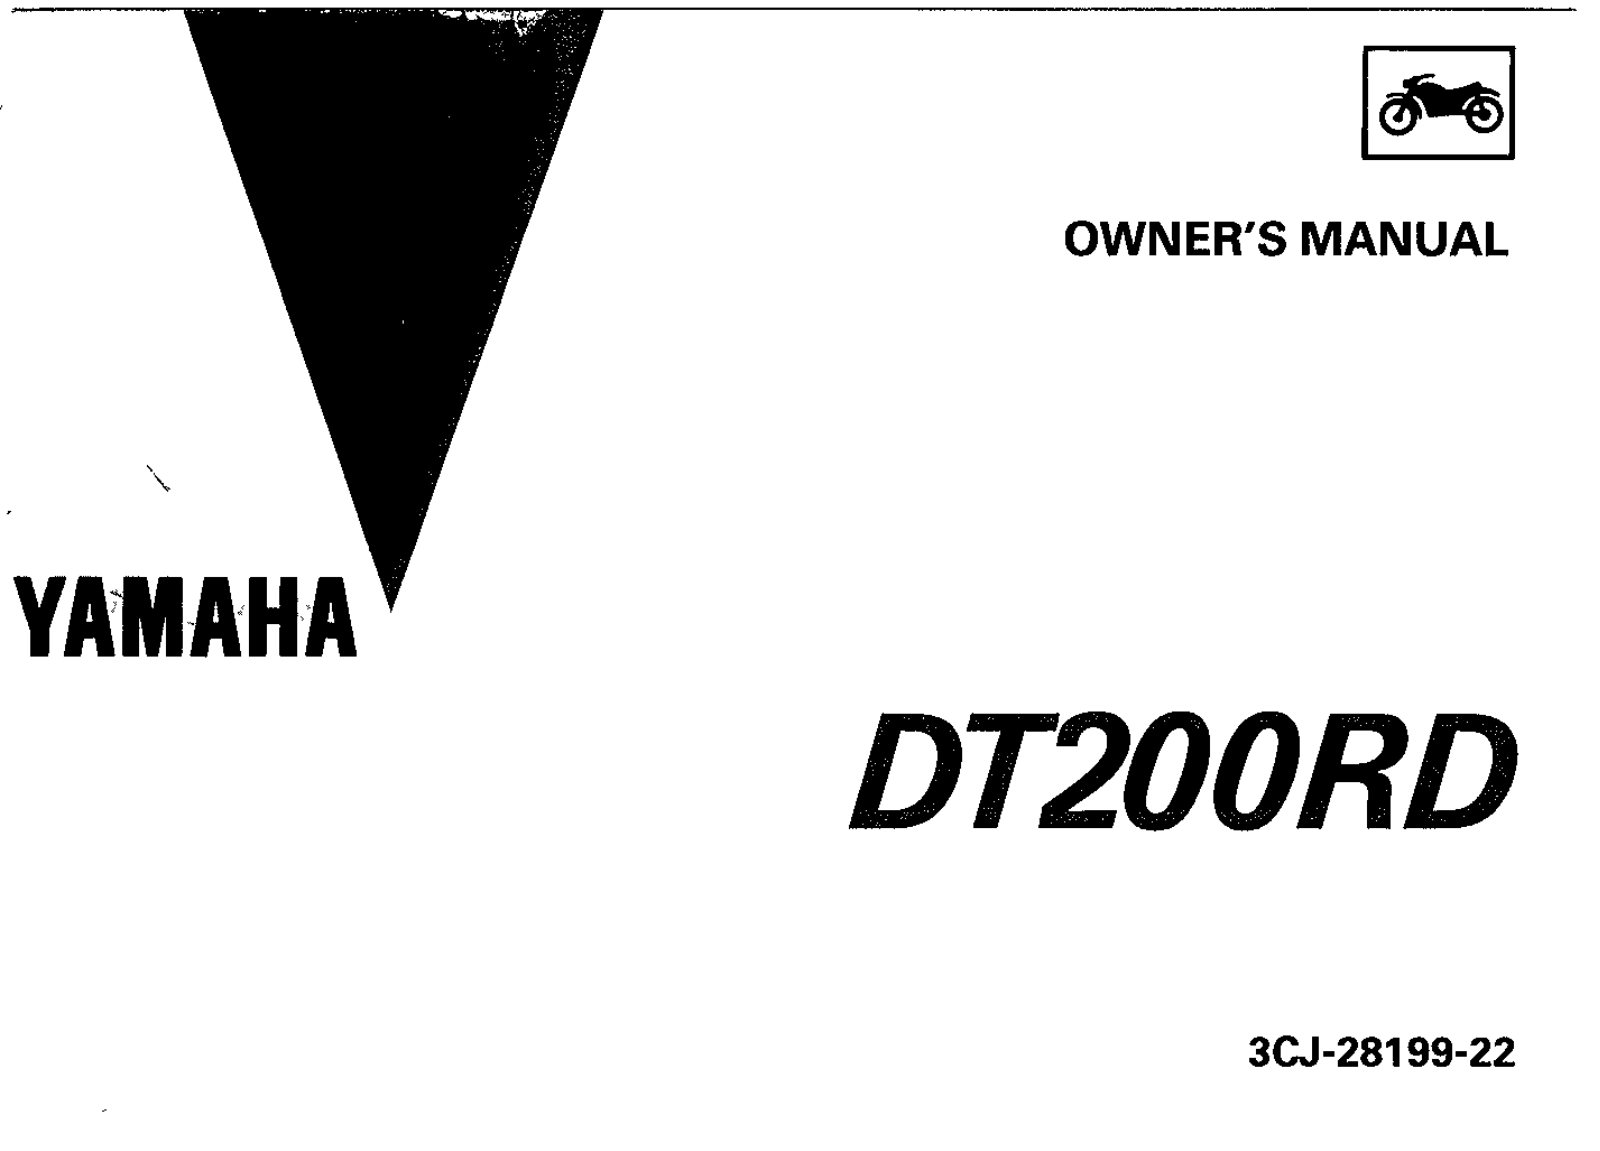 Yamaha DT200 RD 1992 Owner's manual